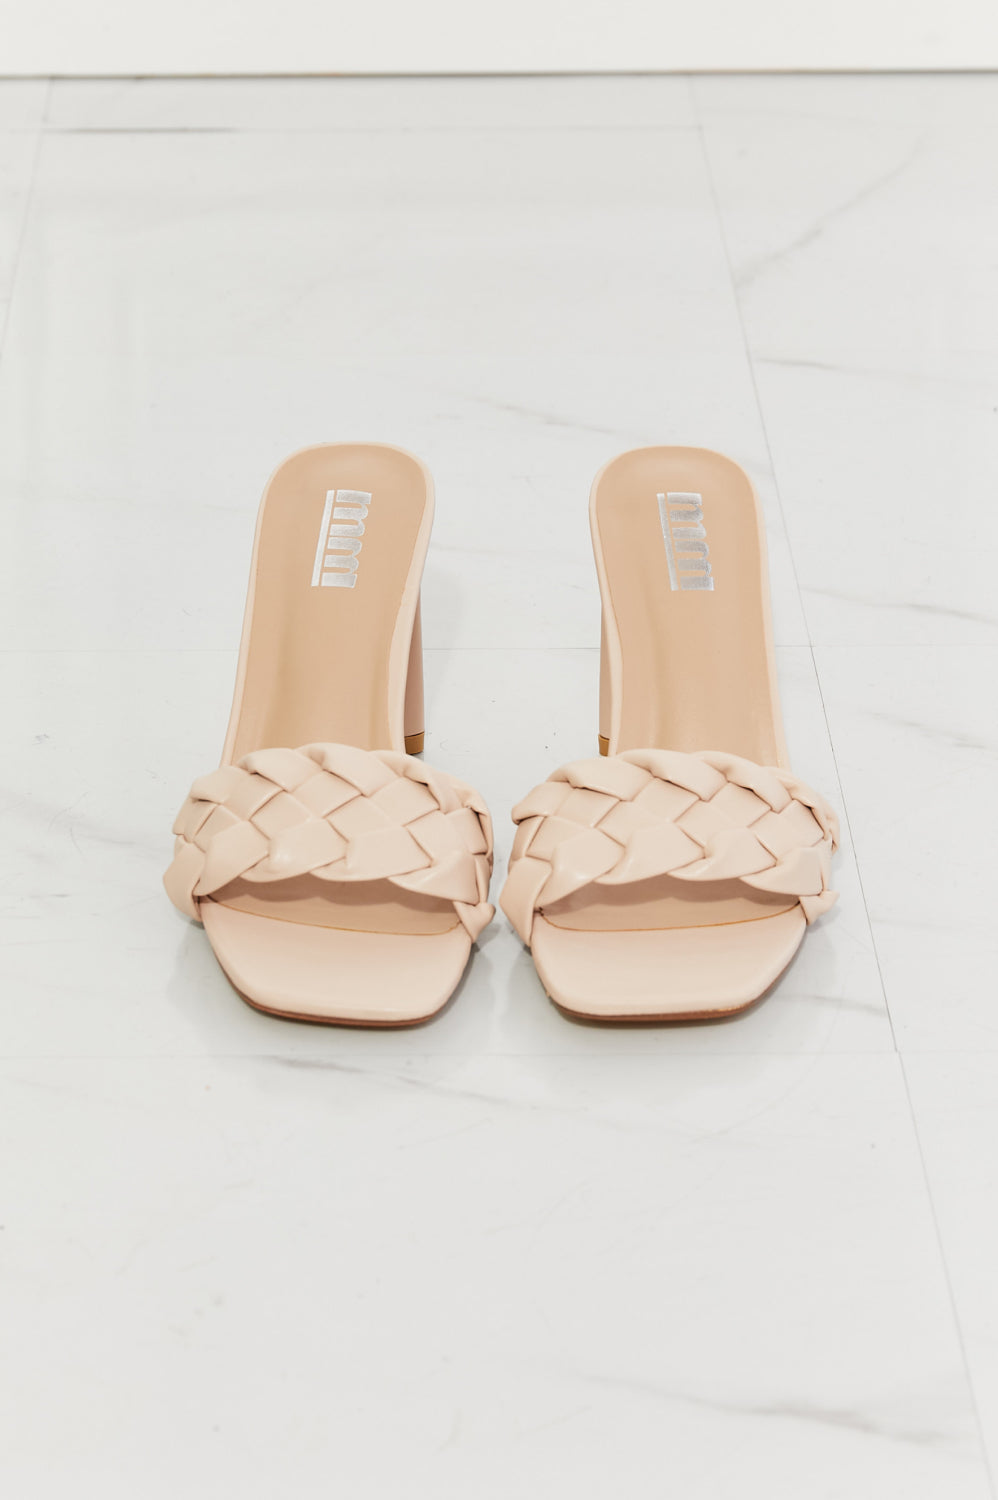 MMShoes Top of the World Braided Block Heel Sandals in Beige MMShoes